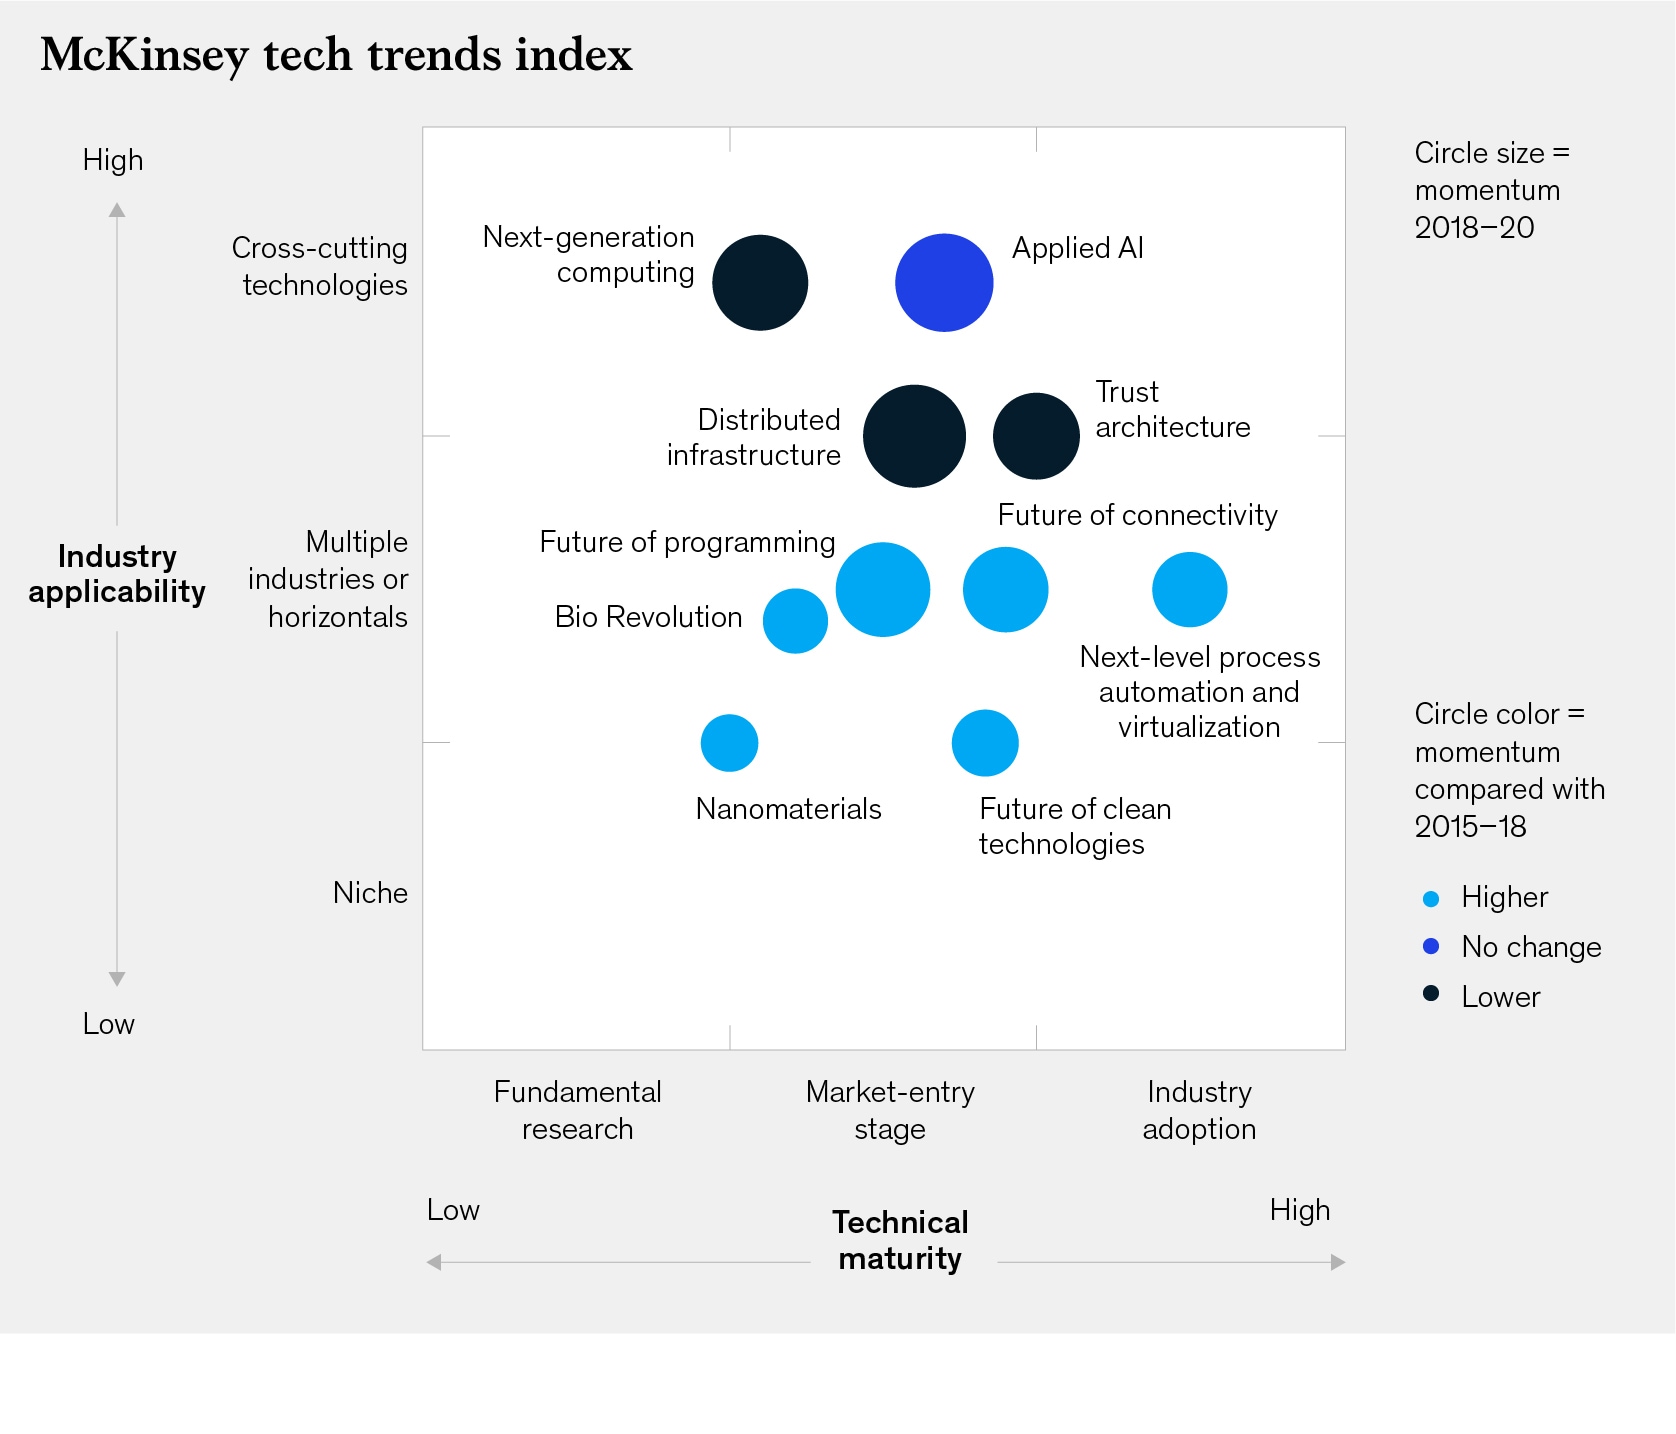 A new McKinsey council identifies today’s top tech trends for business